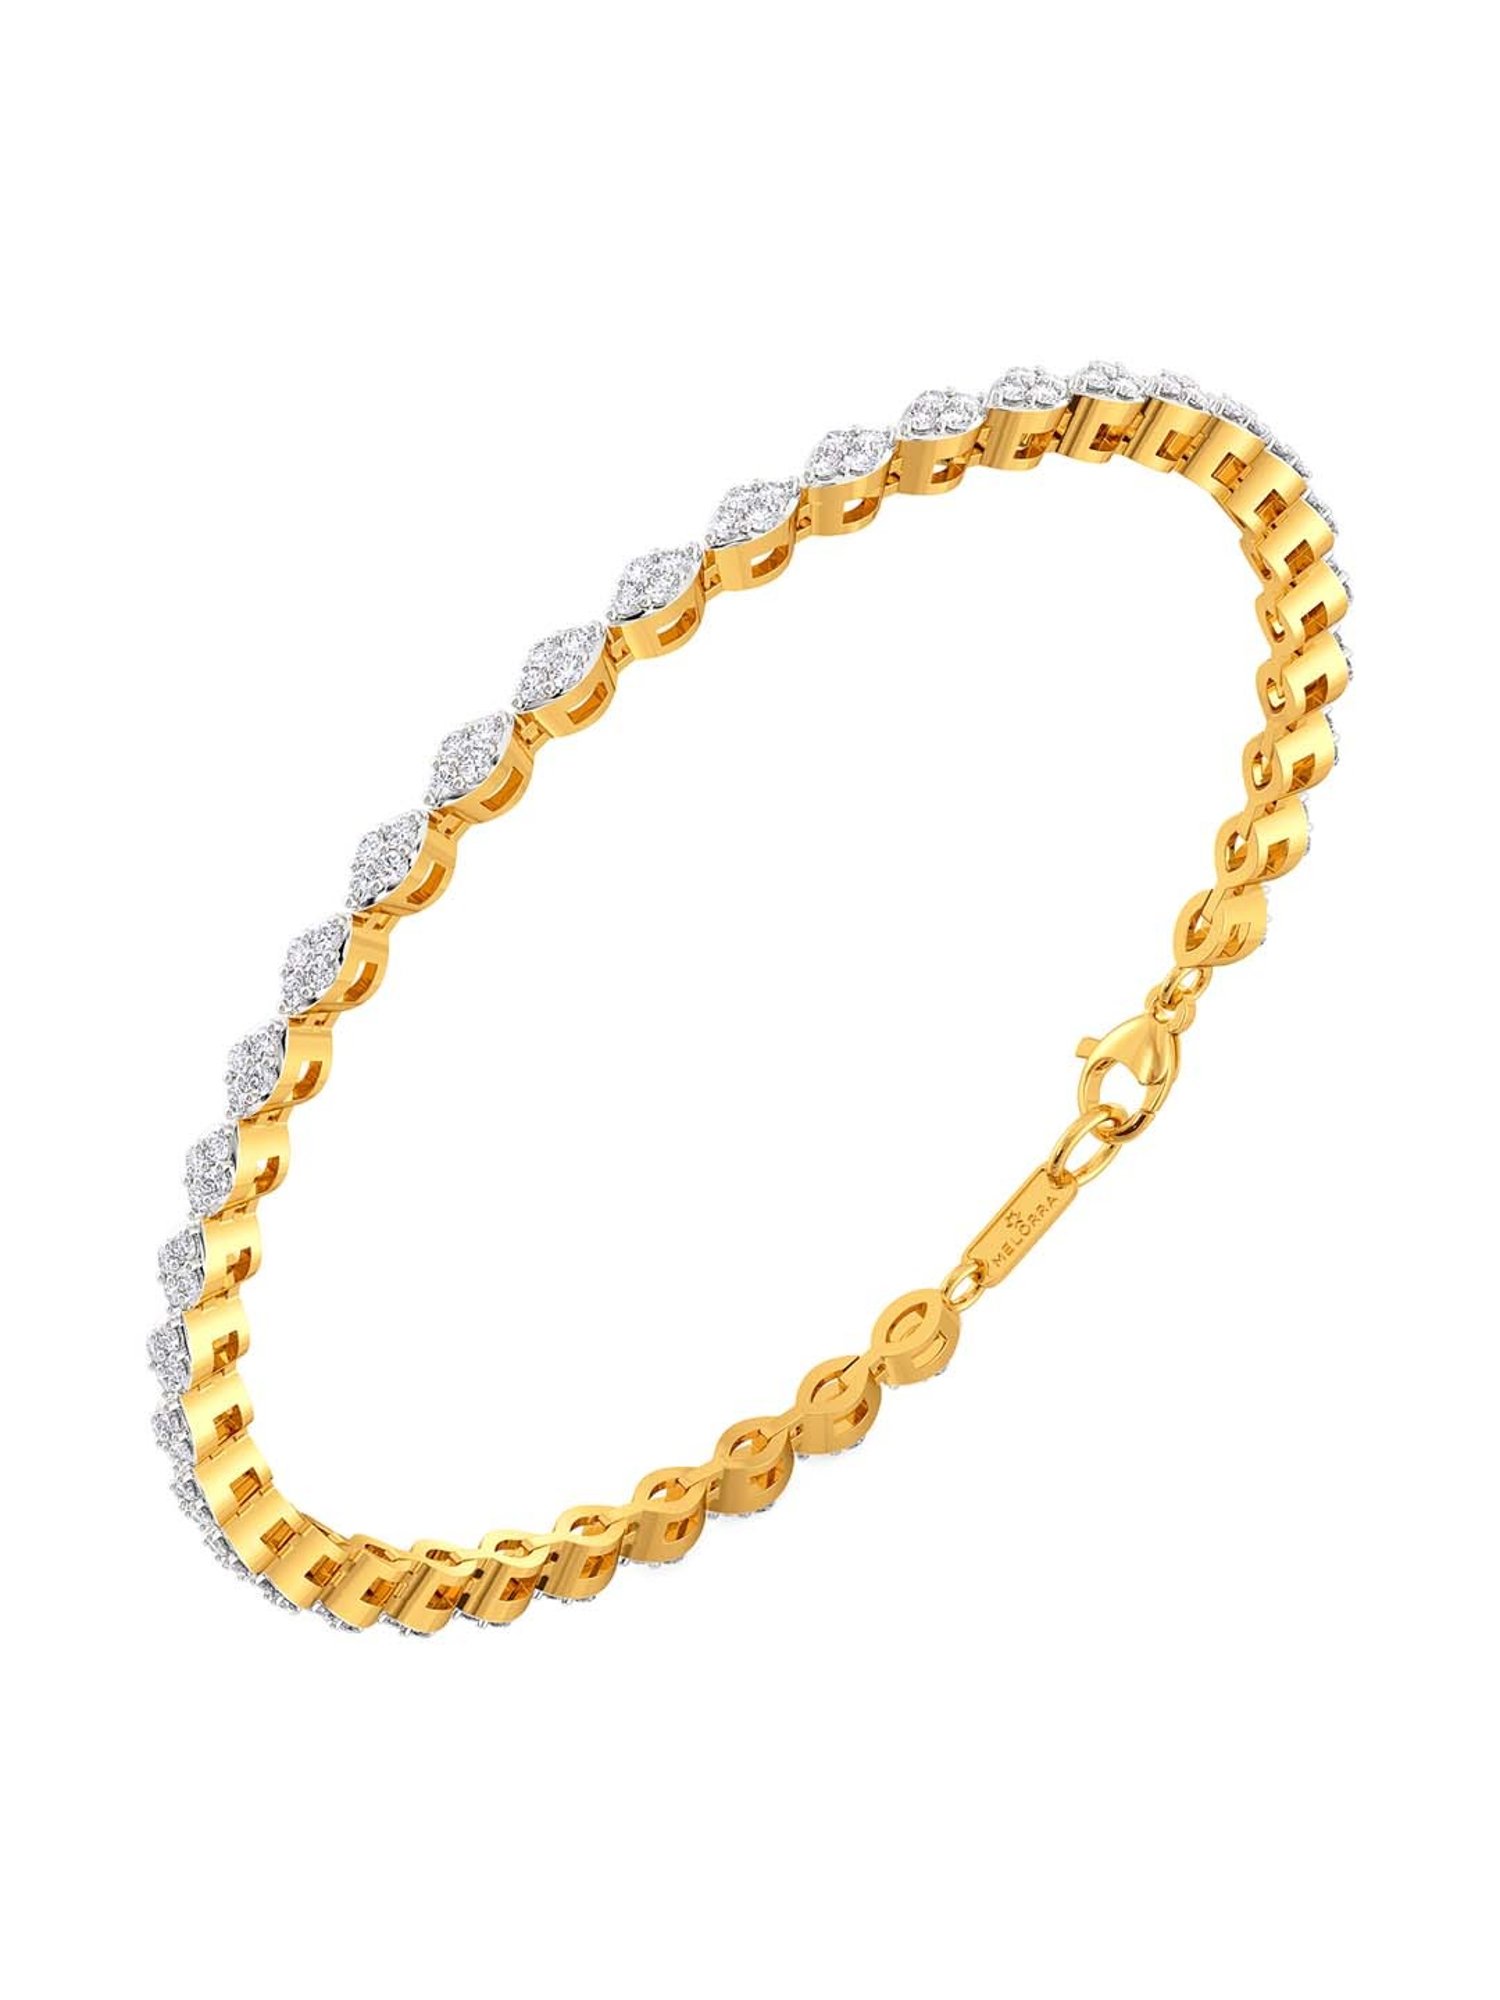 Buy MELORRA 18 KT Grunge Unravelled Gold Bracelet Yellow Gold at Amazon.in